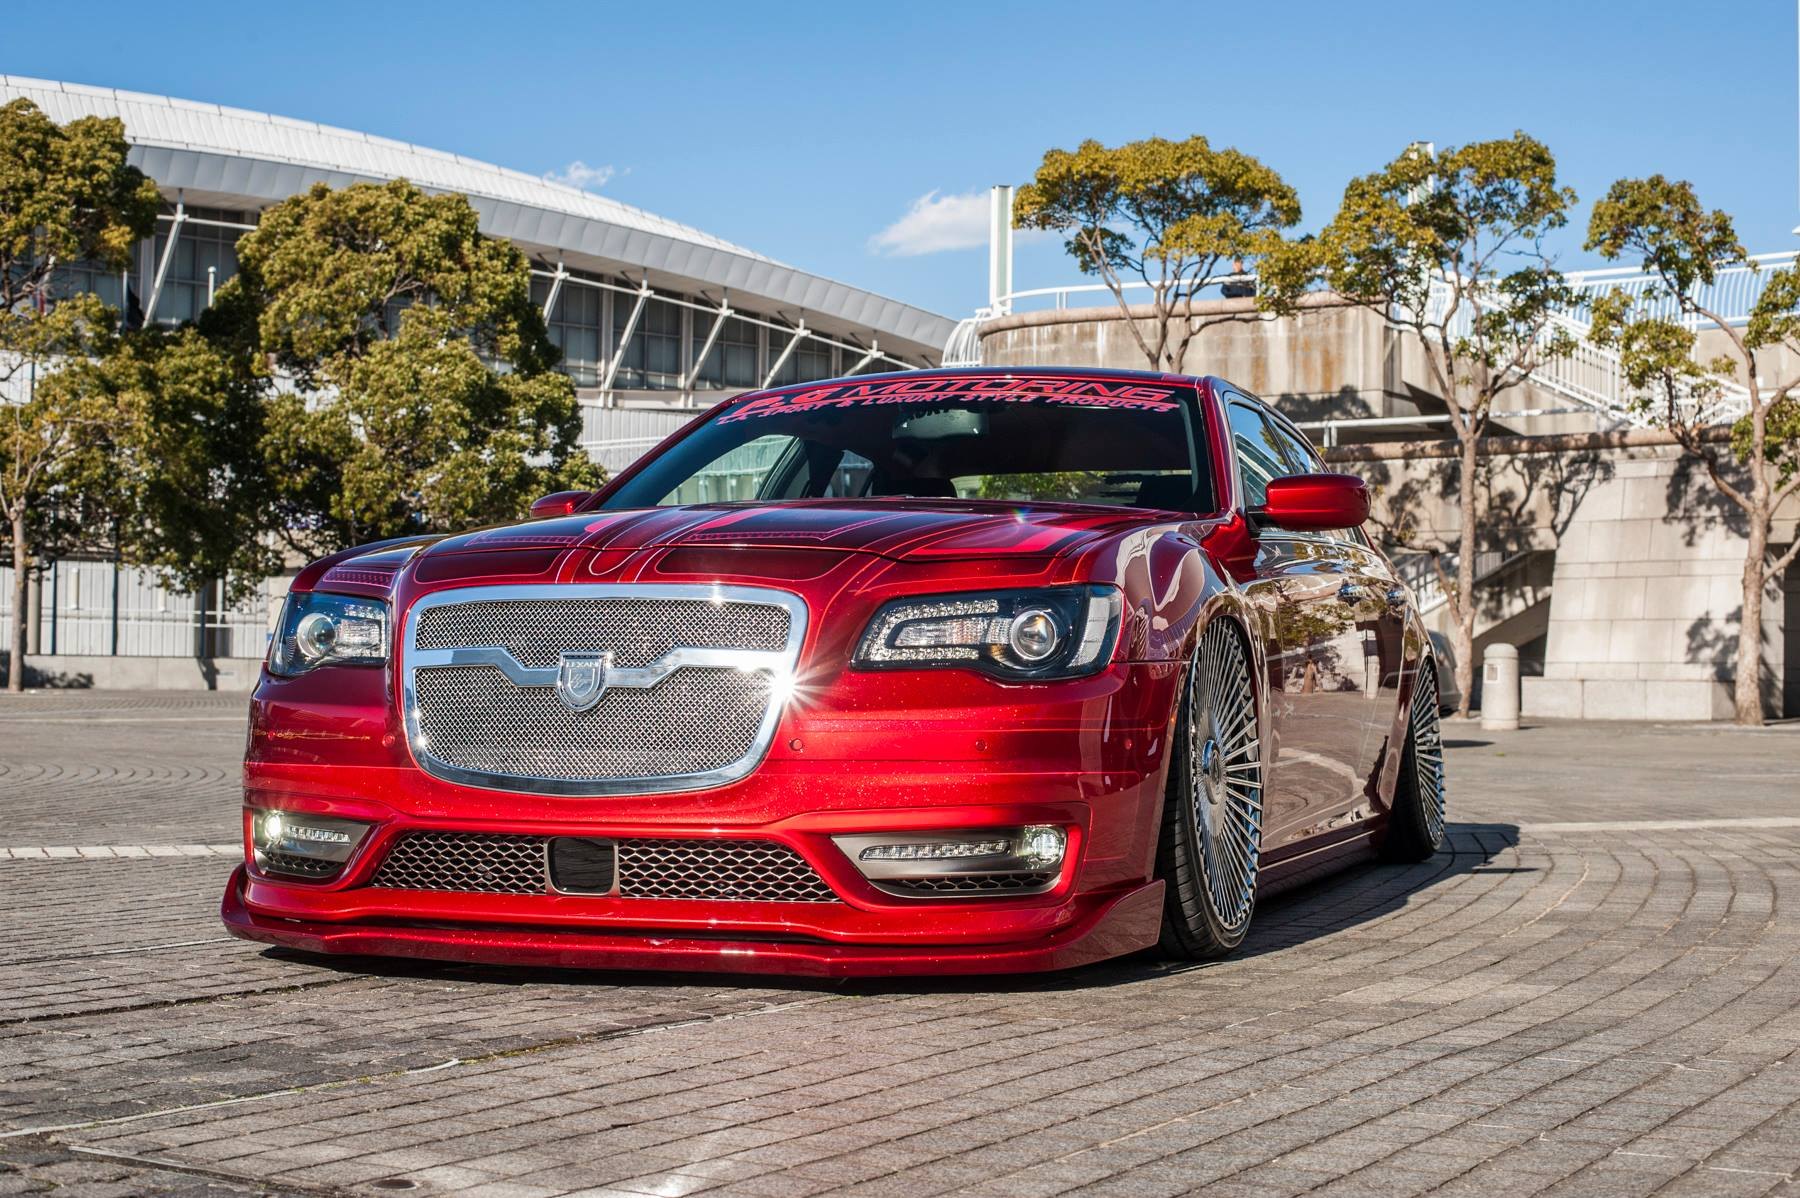 Red Lowered Chrysler 300 with Chrome Mesh Grille - Photo by Lexani